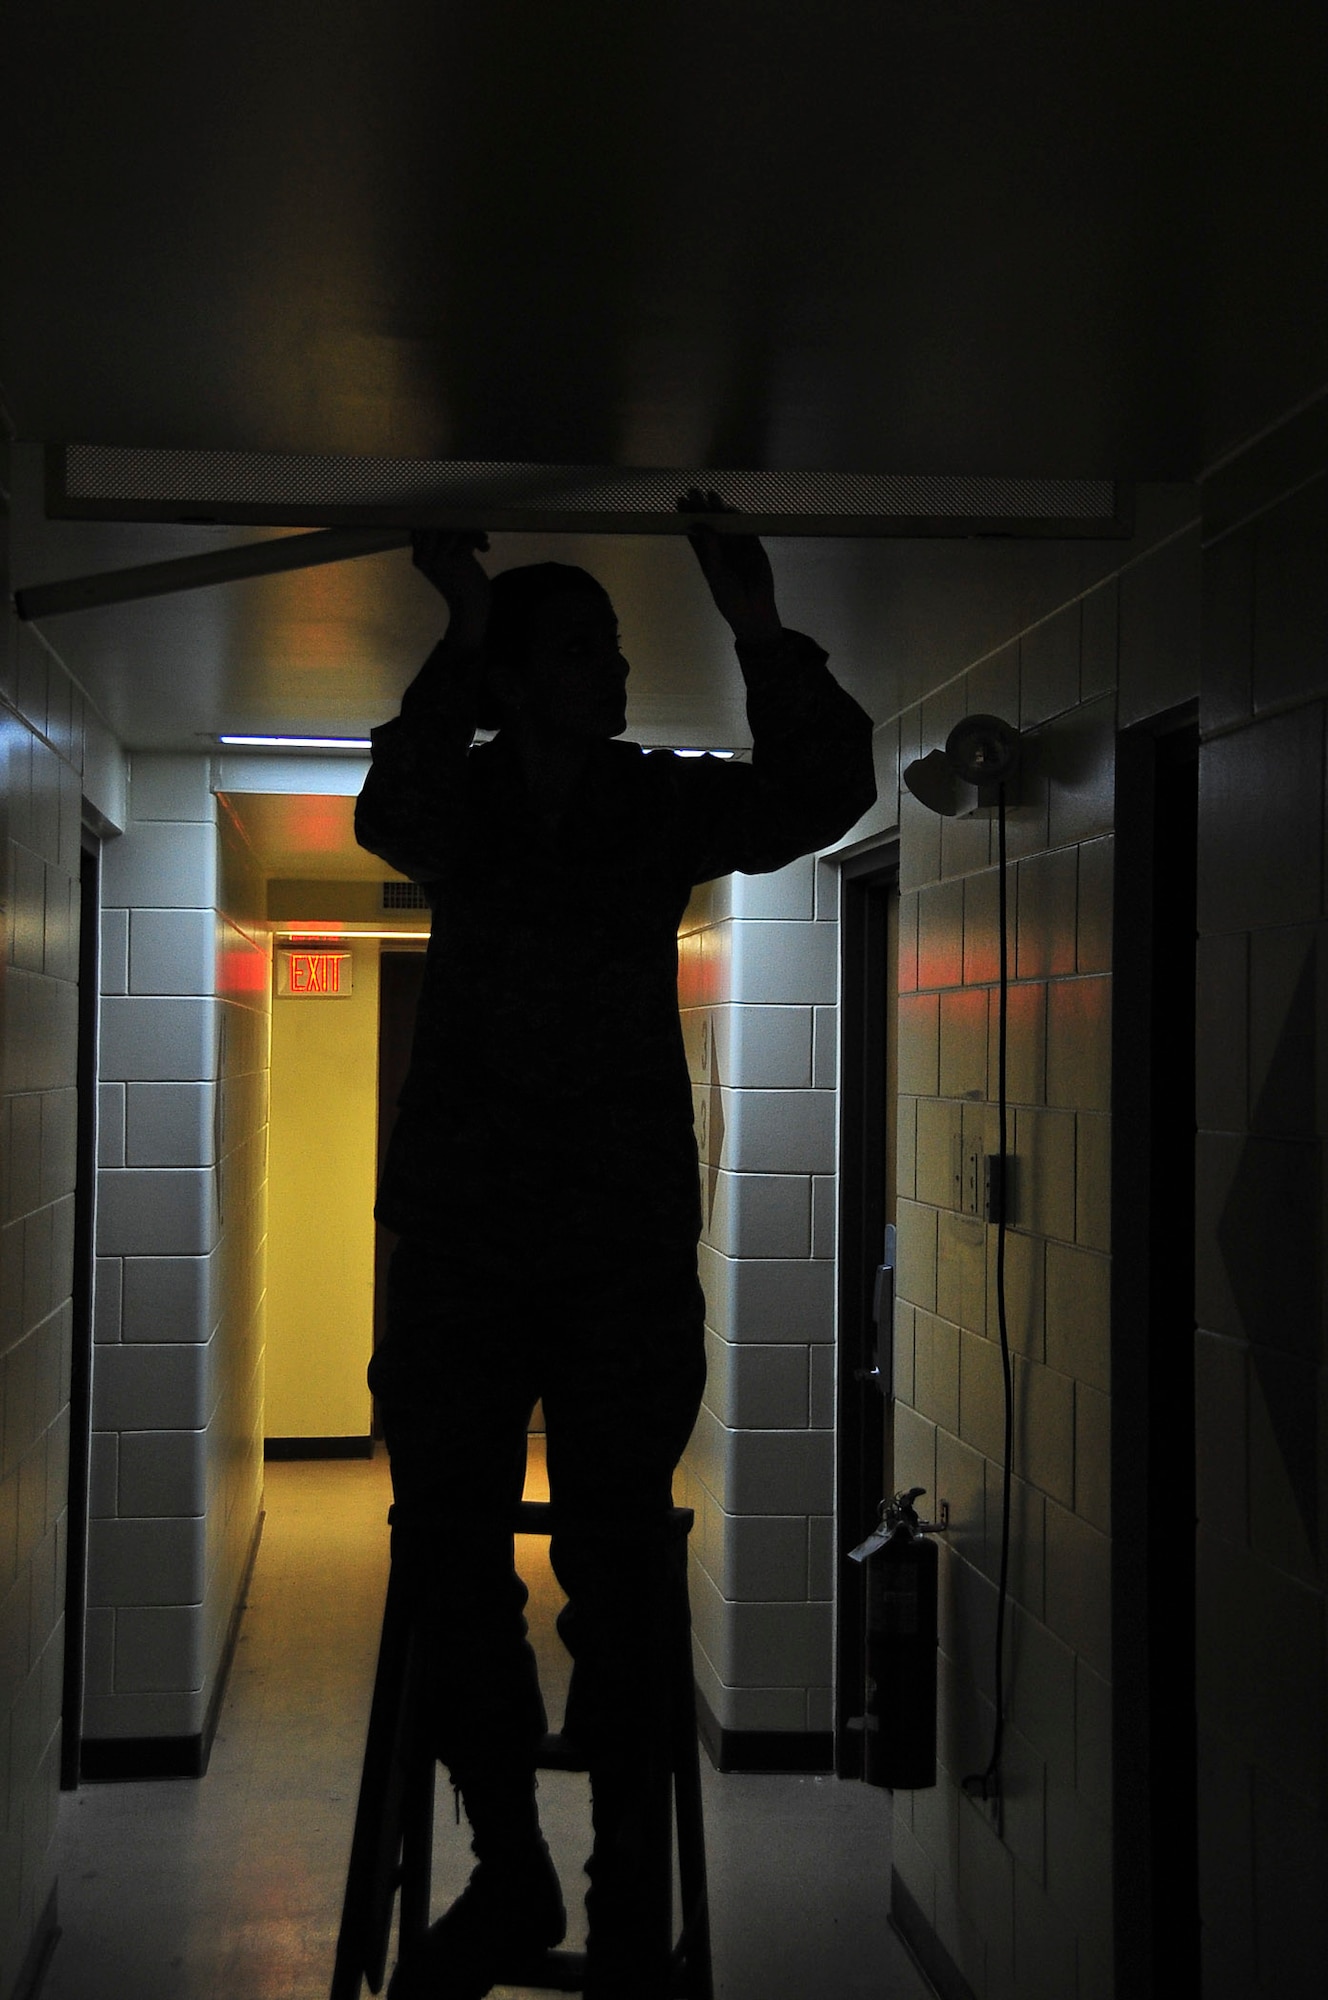 Staff Sgt. Amber Capello, 51st Civil Engineer Squadron Airman dorm leader, changes out a light fixture in a hallway here, Feb. 29, 2012. Sergeant Capello is responsible for dormitories which house 192 residents. (U.S. Air Force photo/Senior Airman Adam Grant)